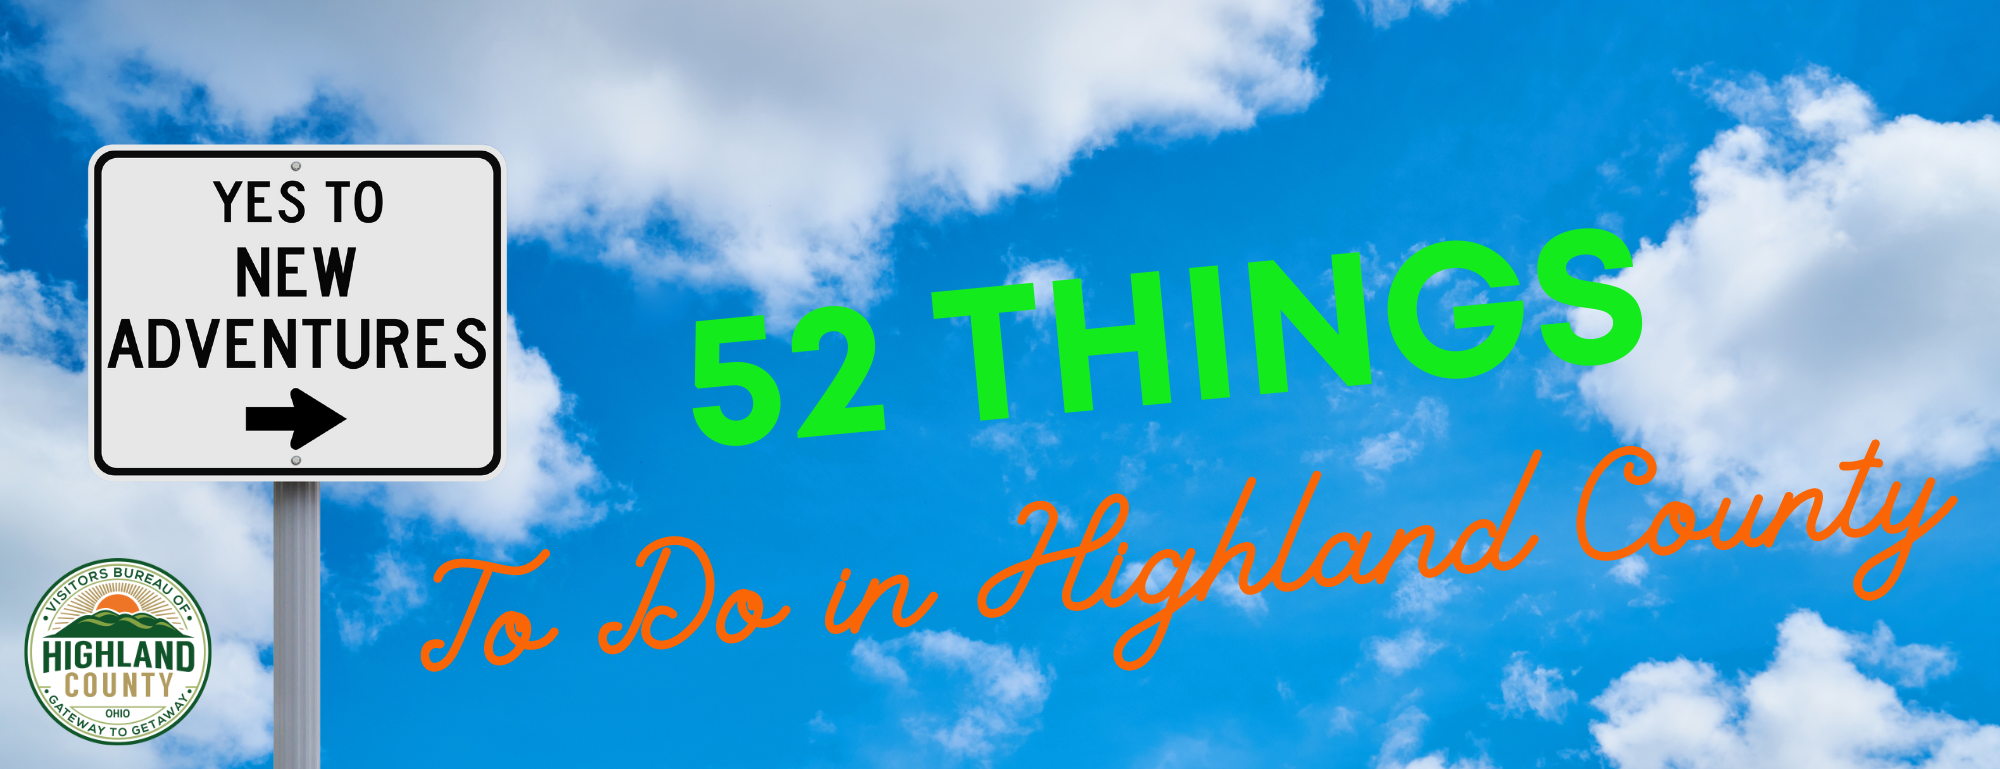 52 Things to Do in Highland County